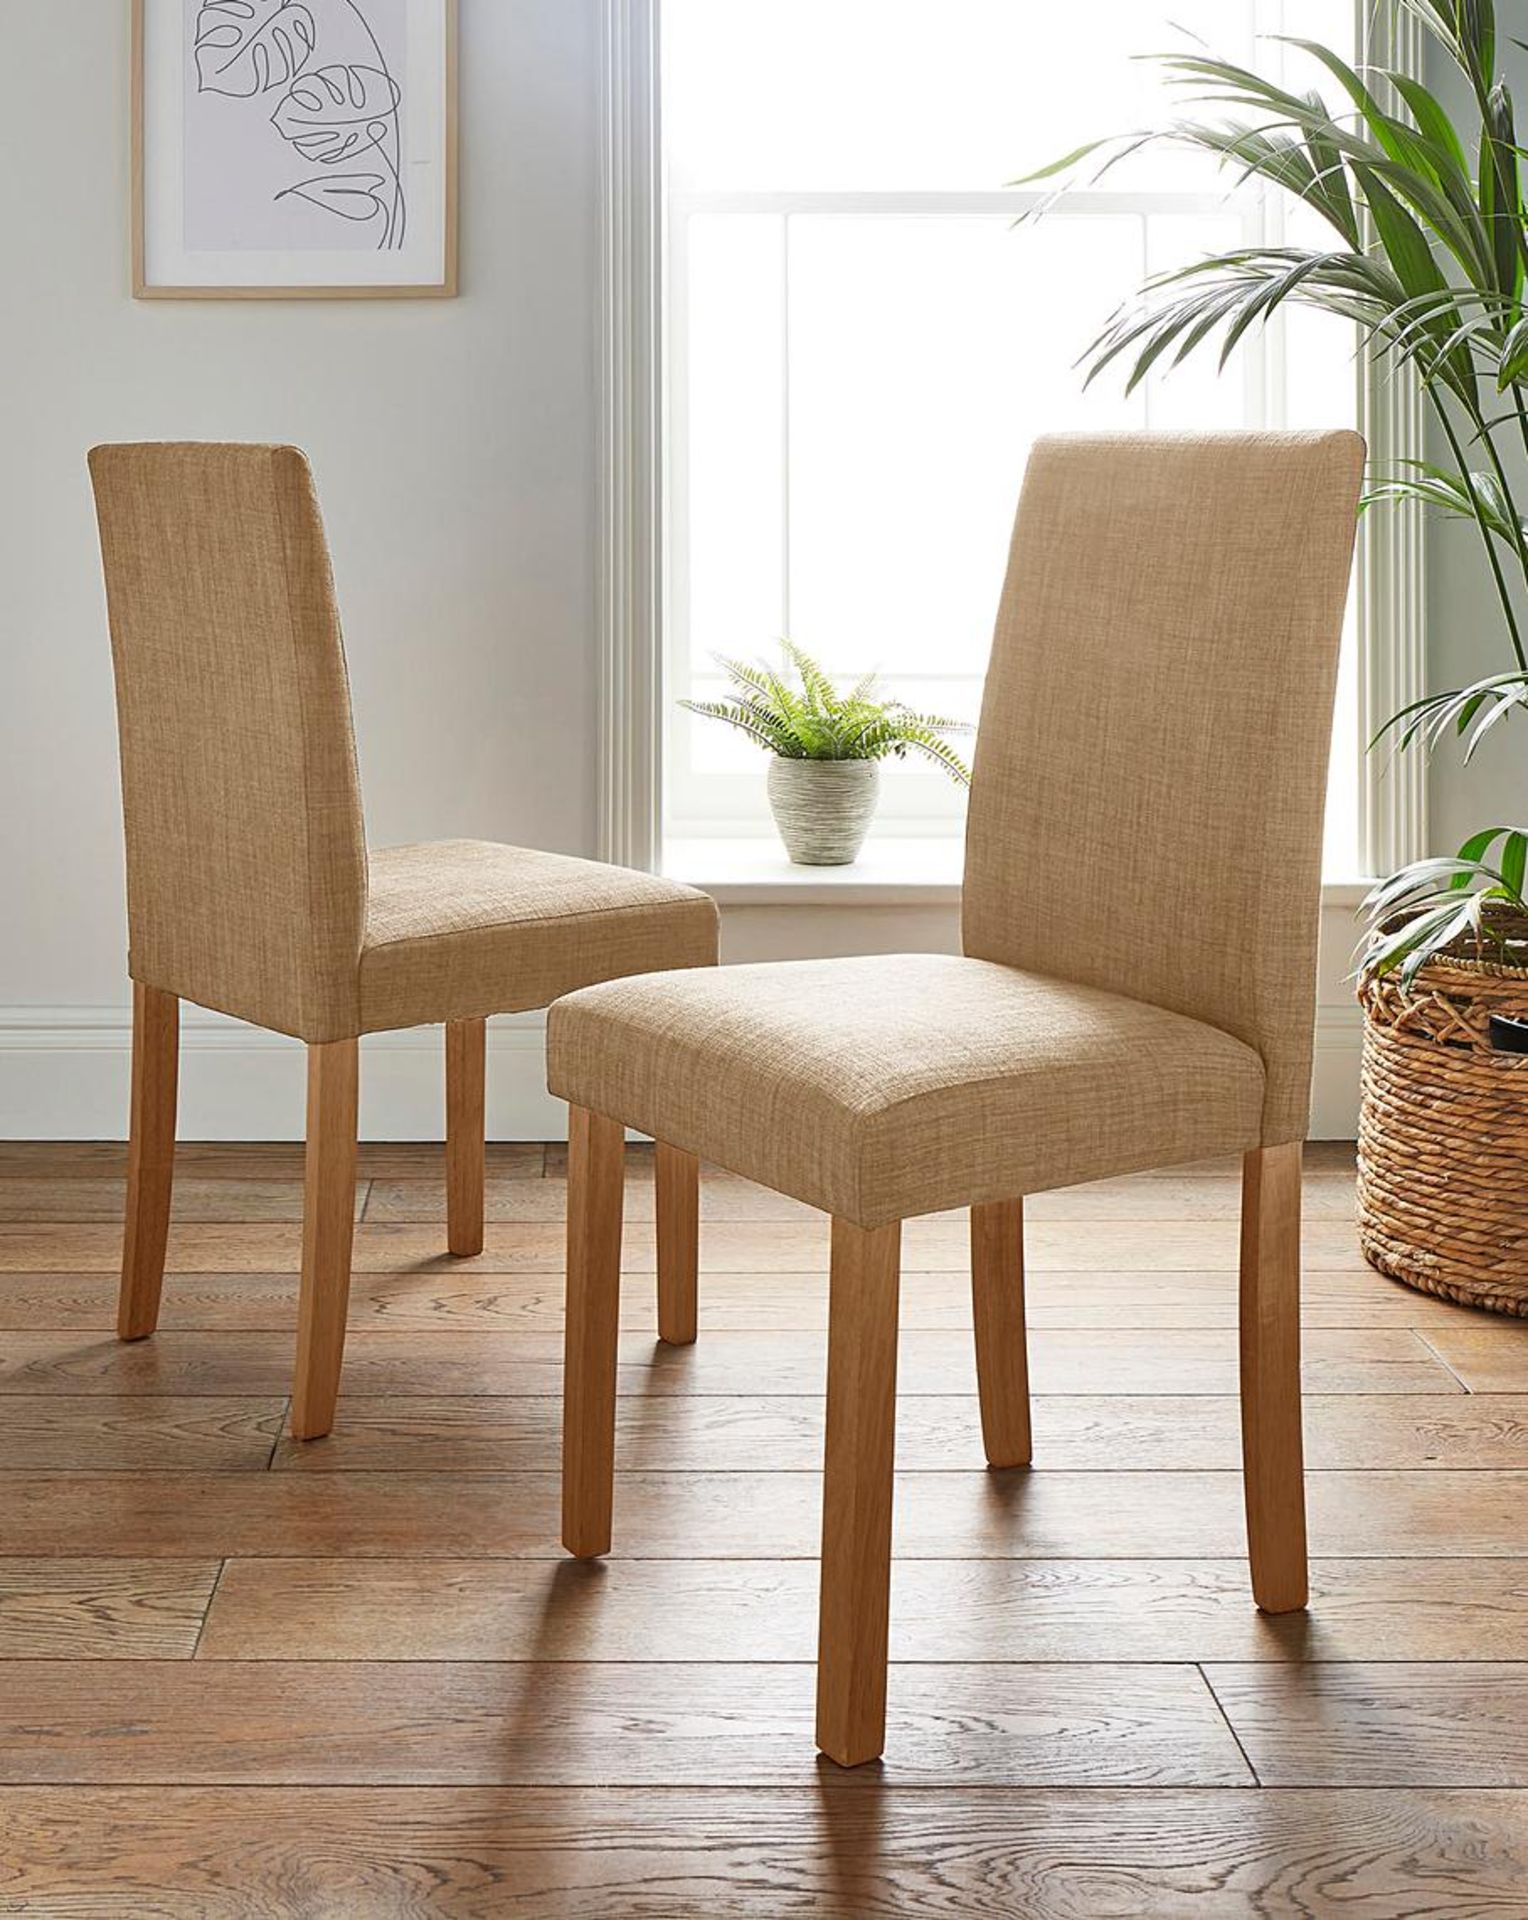 Pair of Ava Fabric Dining Chairs. RRP £199.00. - SR5. The Ava Fabric Dining Chairs are classic